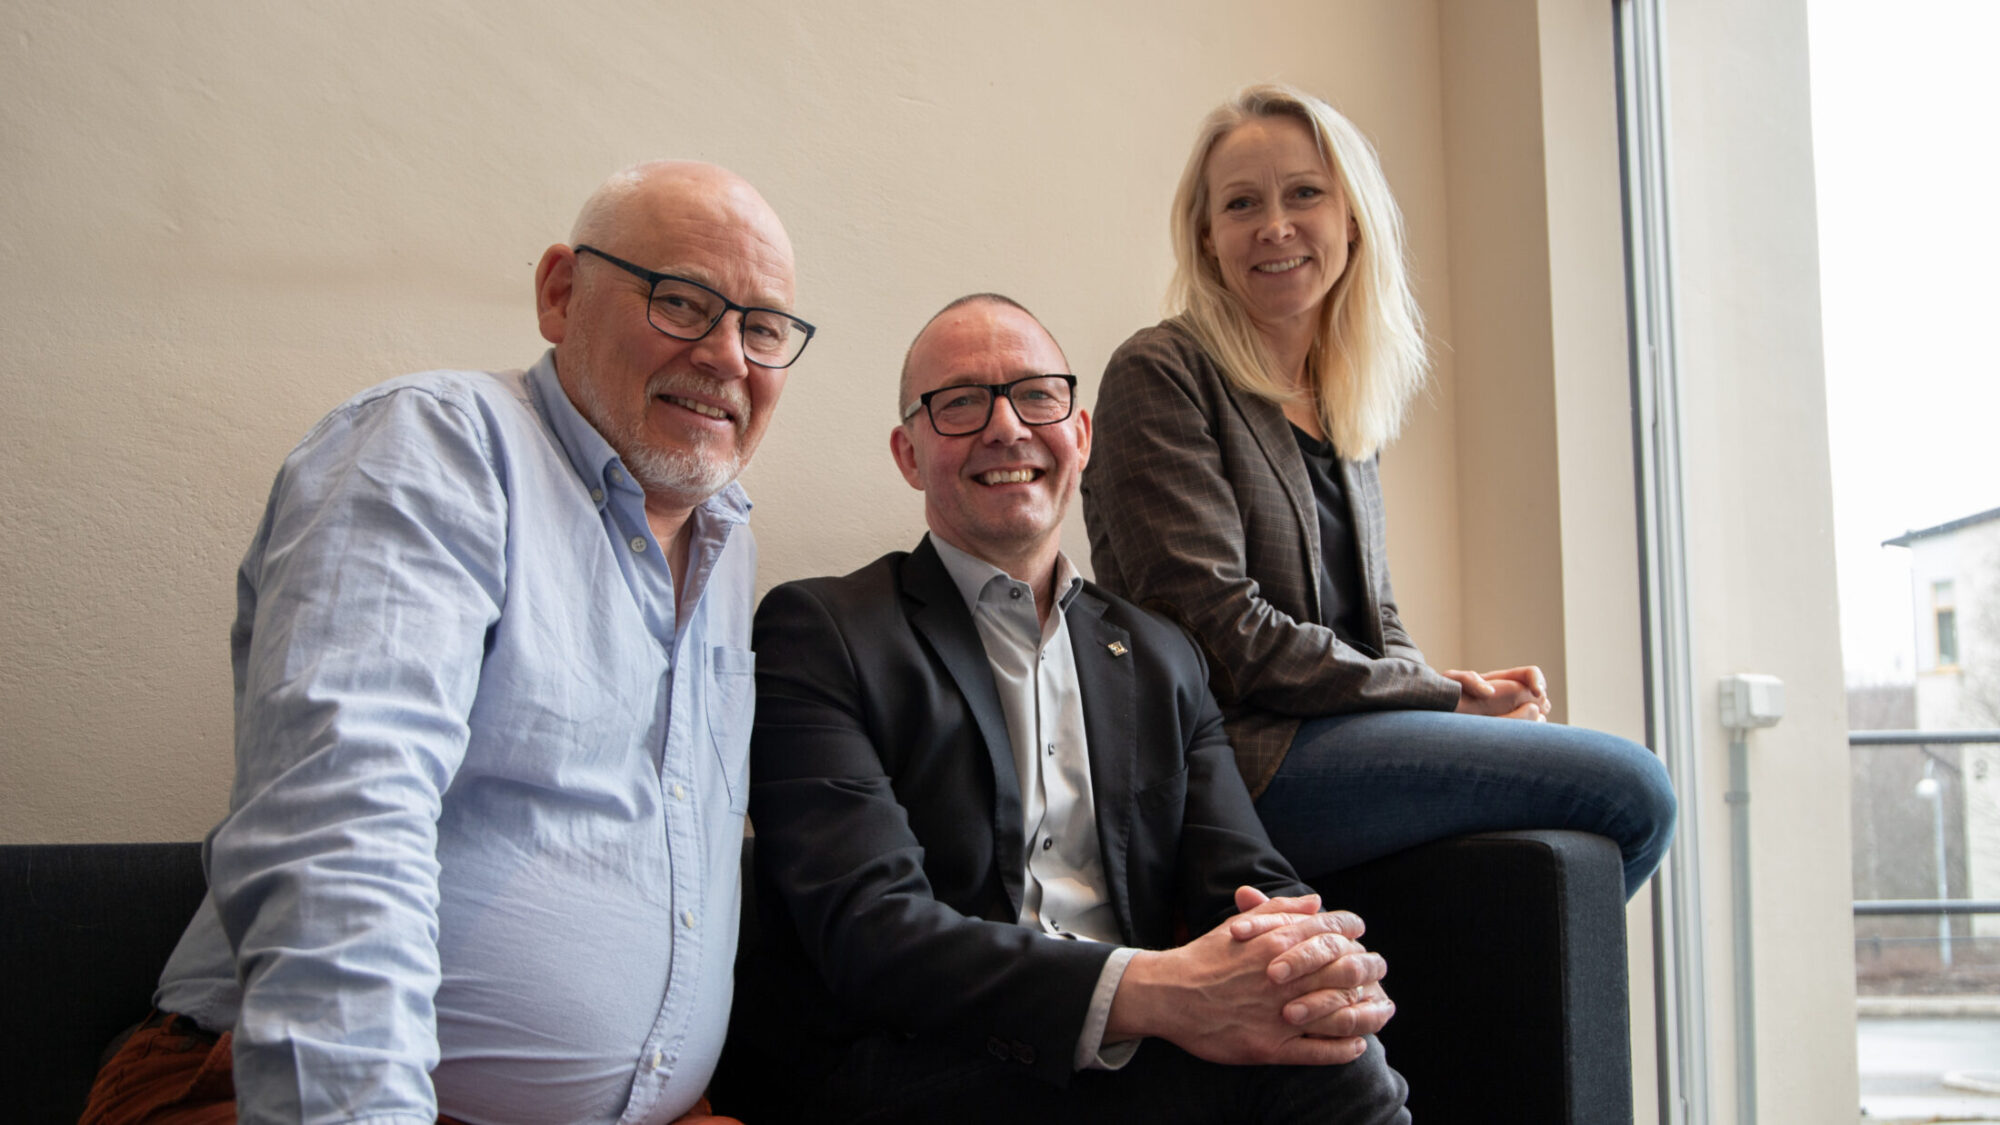 Sven Wadman (Mid Sweden University), Matts Nyman (BizMaker) and Åse Angland Lindvall (Peak Innovation) look forward to expanding the cooperation between the organizations.